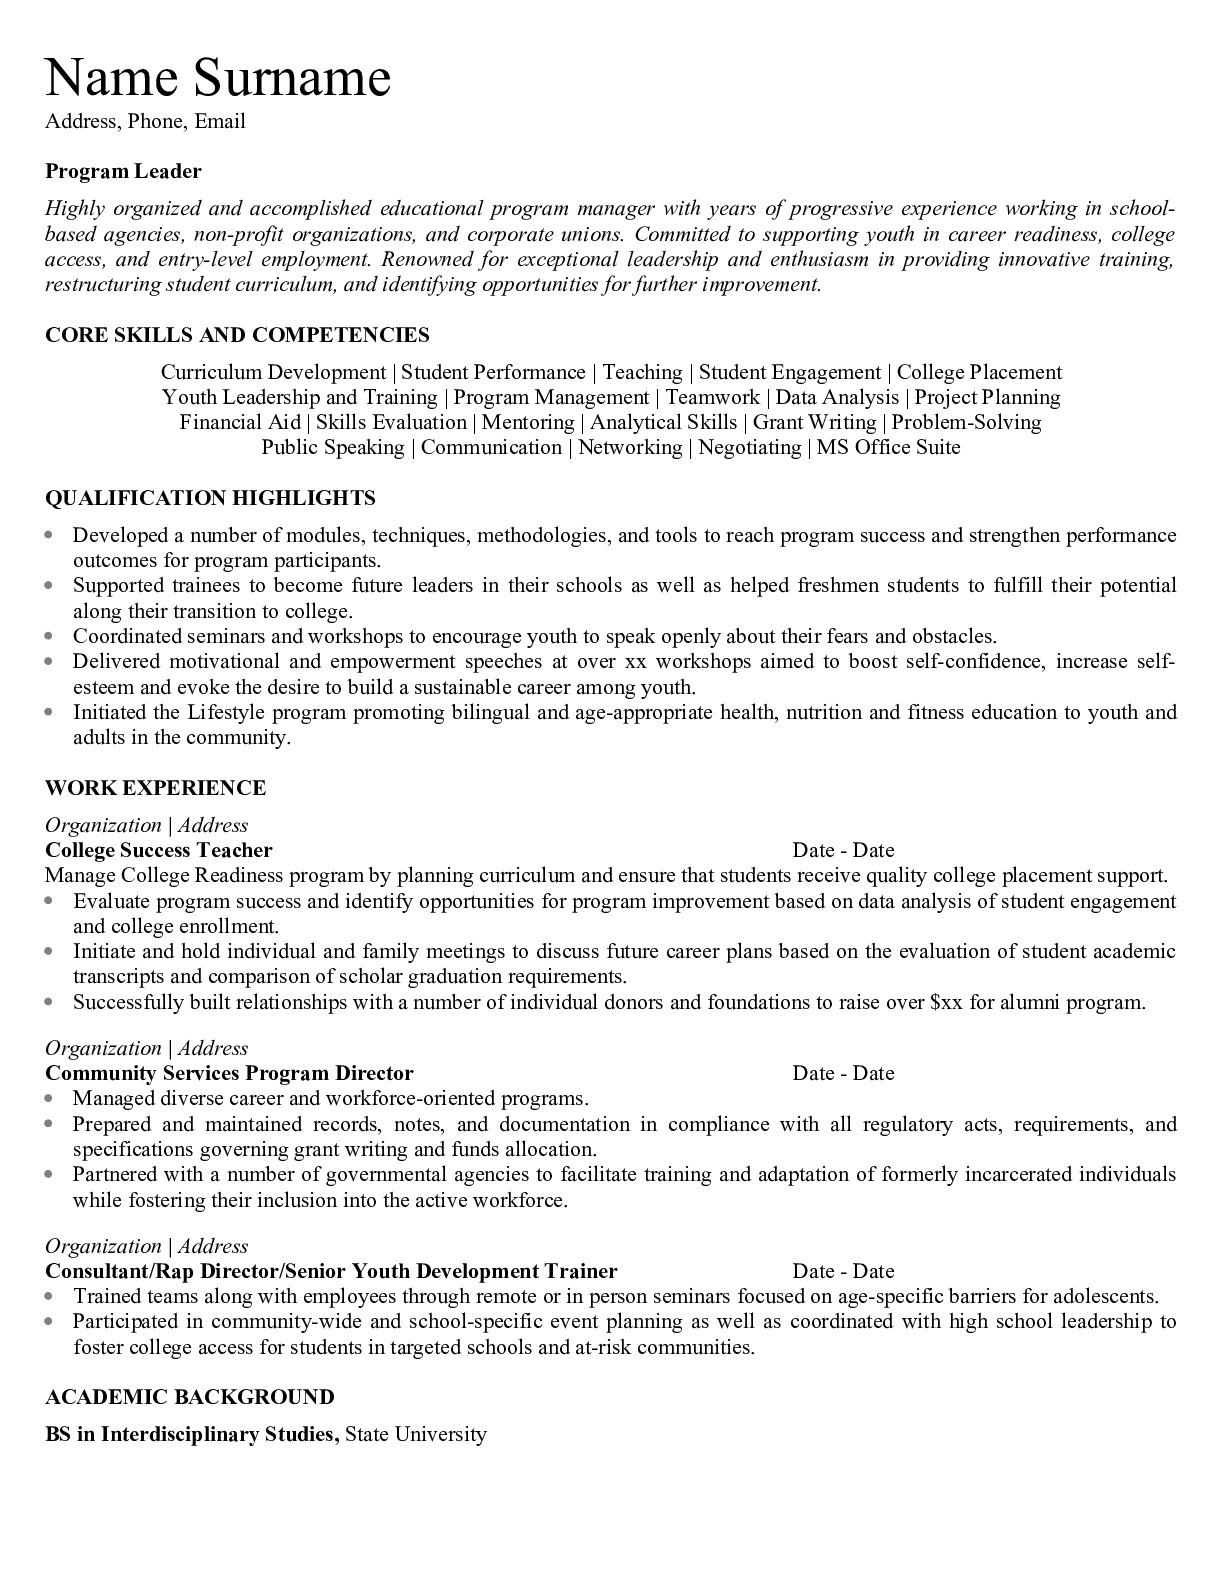 resume editing services near me